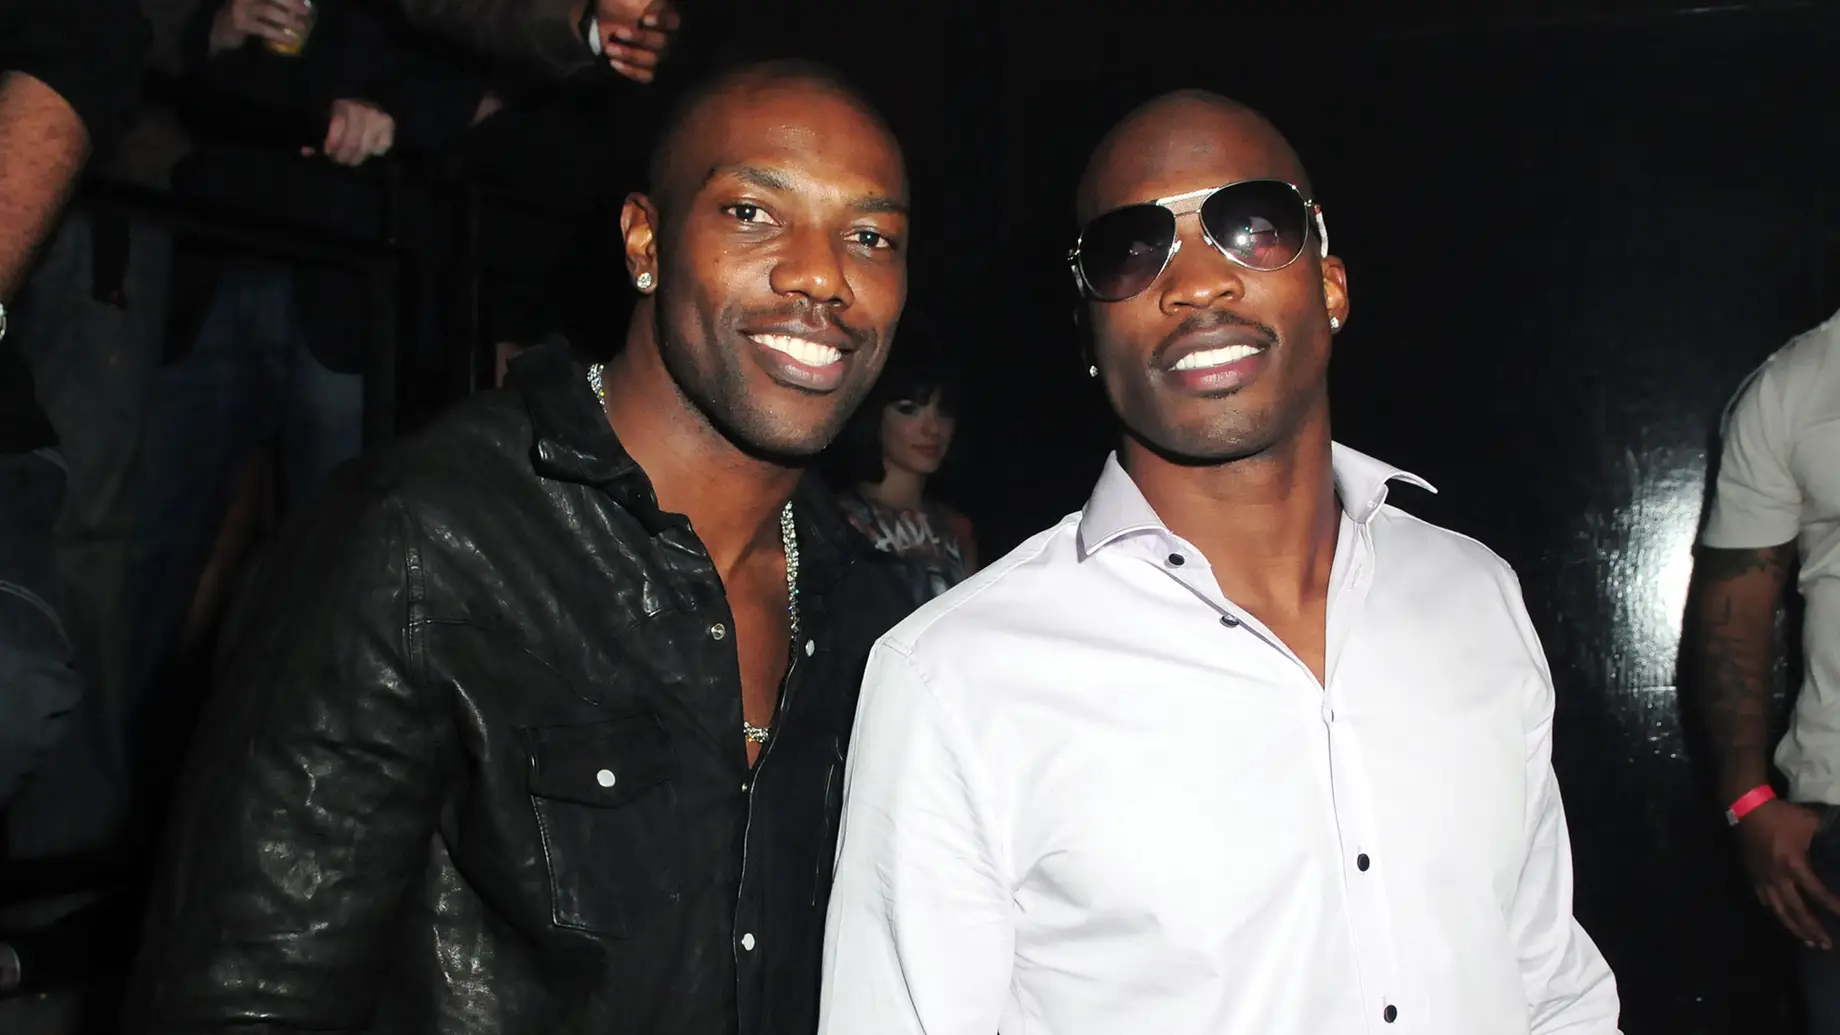 Chad Ochocinco and Terrell Owens Recall Hooking Up With 17 Women in 12 Hours [Video]